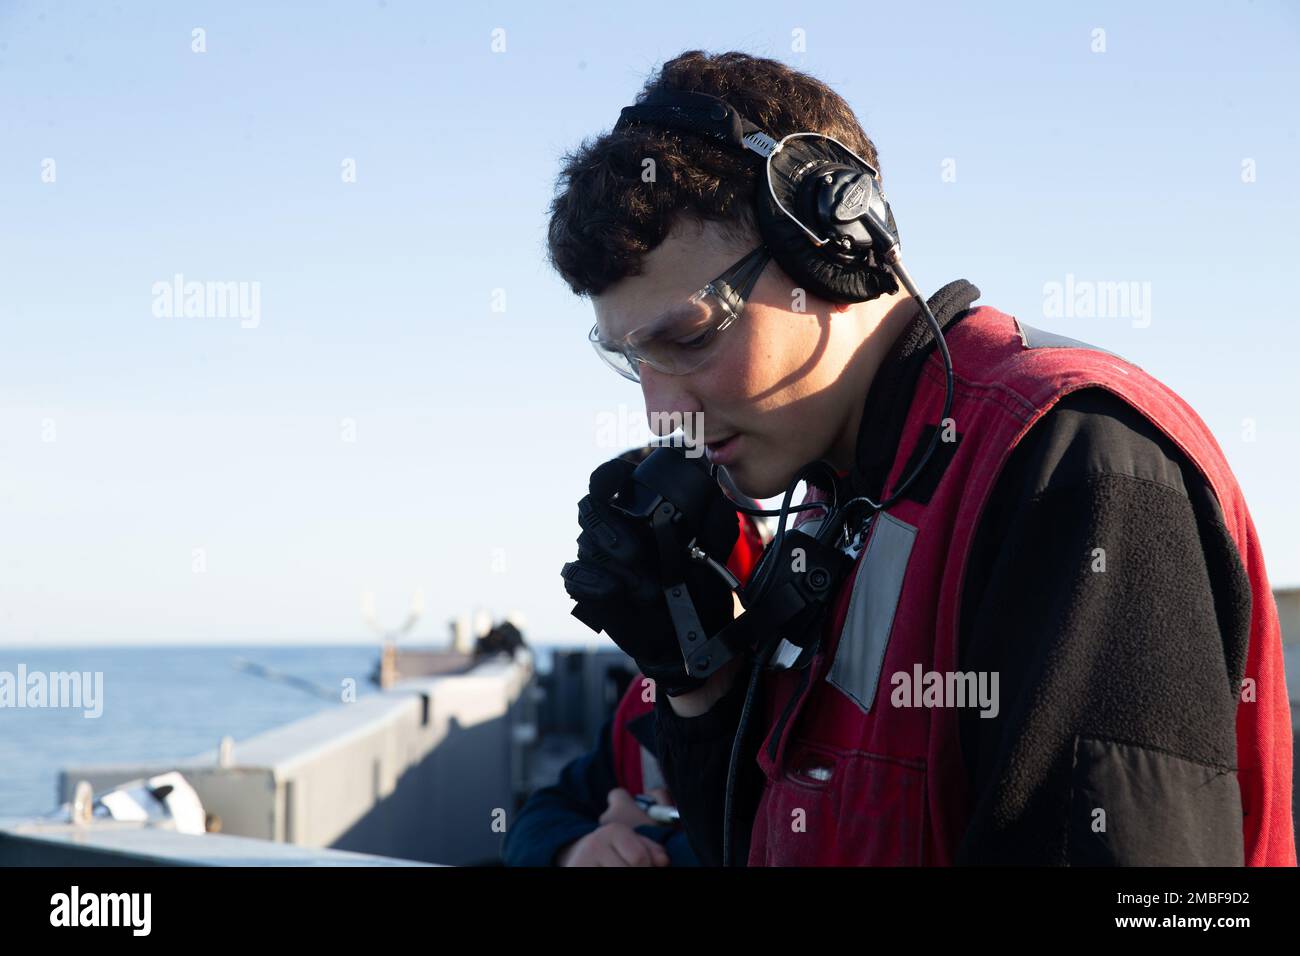 Aviation Ordnanceman Airman William Cauldwell, from Fishers, Indiana, assigned to USS Gerald R. Ford's (CVN 78) weapons, uses a sound-powered telephone to clear green range for the MK 38 - 25 mm machine gun system for inspection, June 15, 2022. Ford is underway in the Atlantic Ocean conducting a Board of Inspection and Survey (INSURV) assessment to report ship readiness and ensure all spaces and equipment meet Navy Standards. Stock Photo